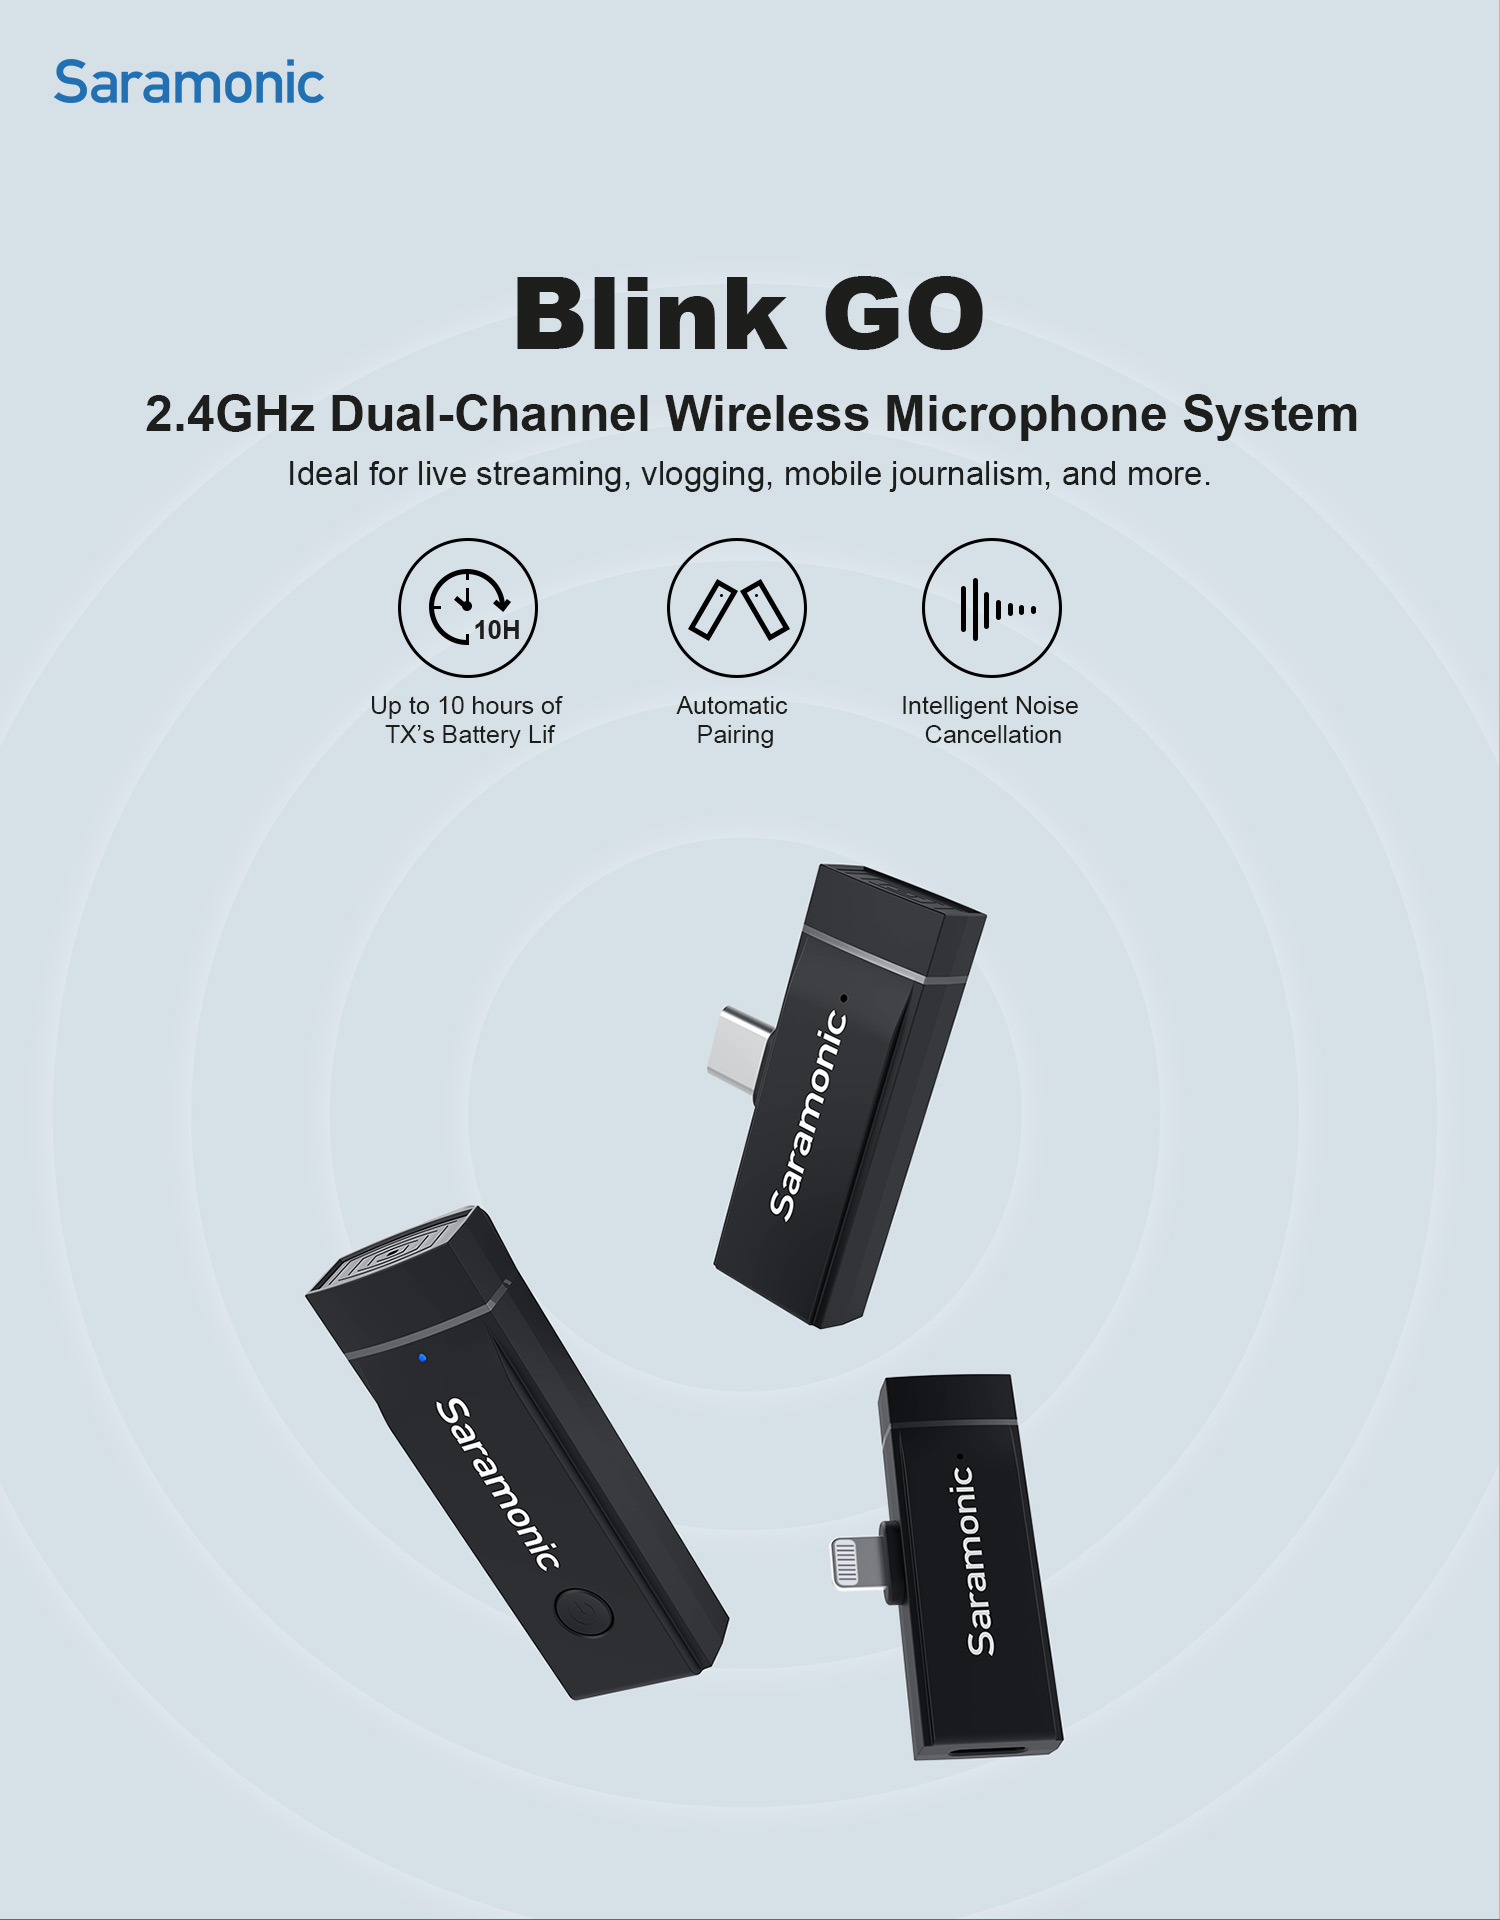 Blink Go wireless microphone system 